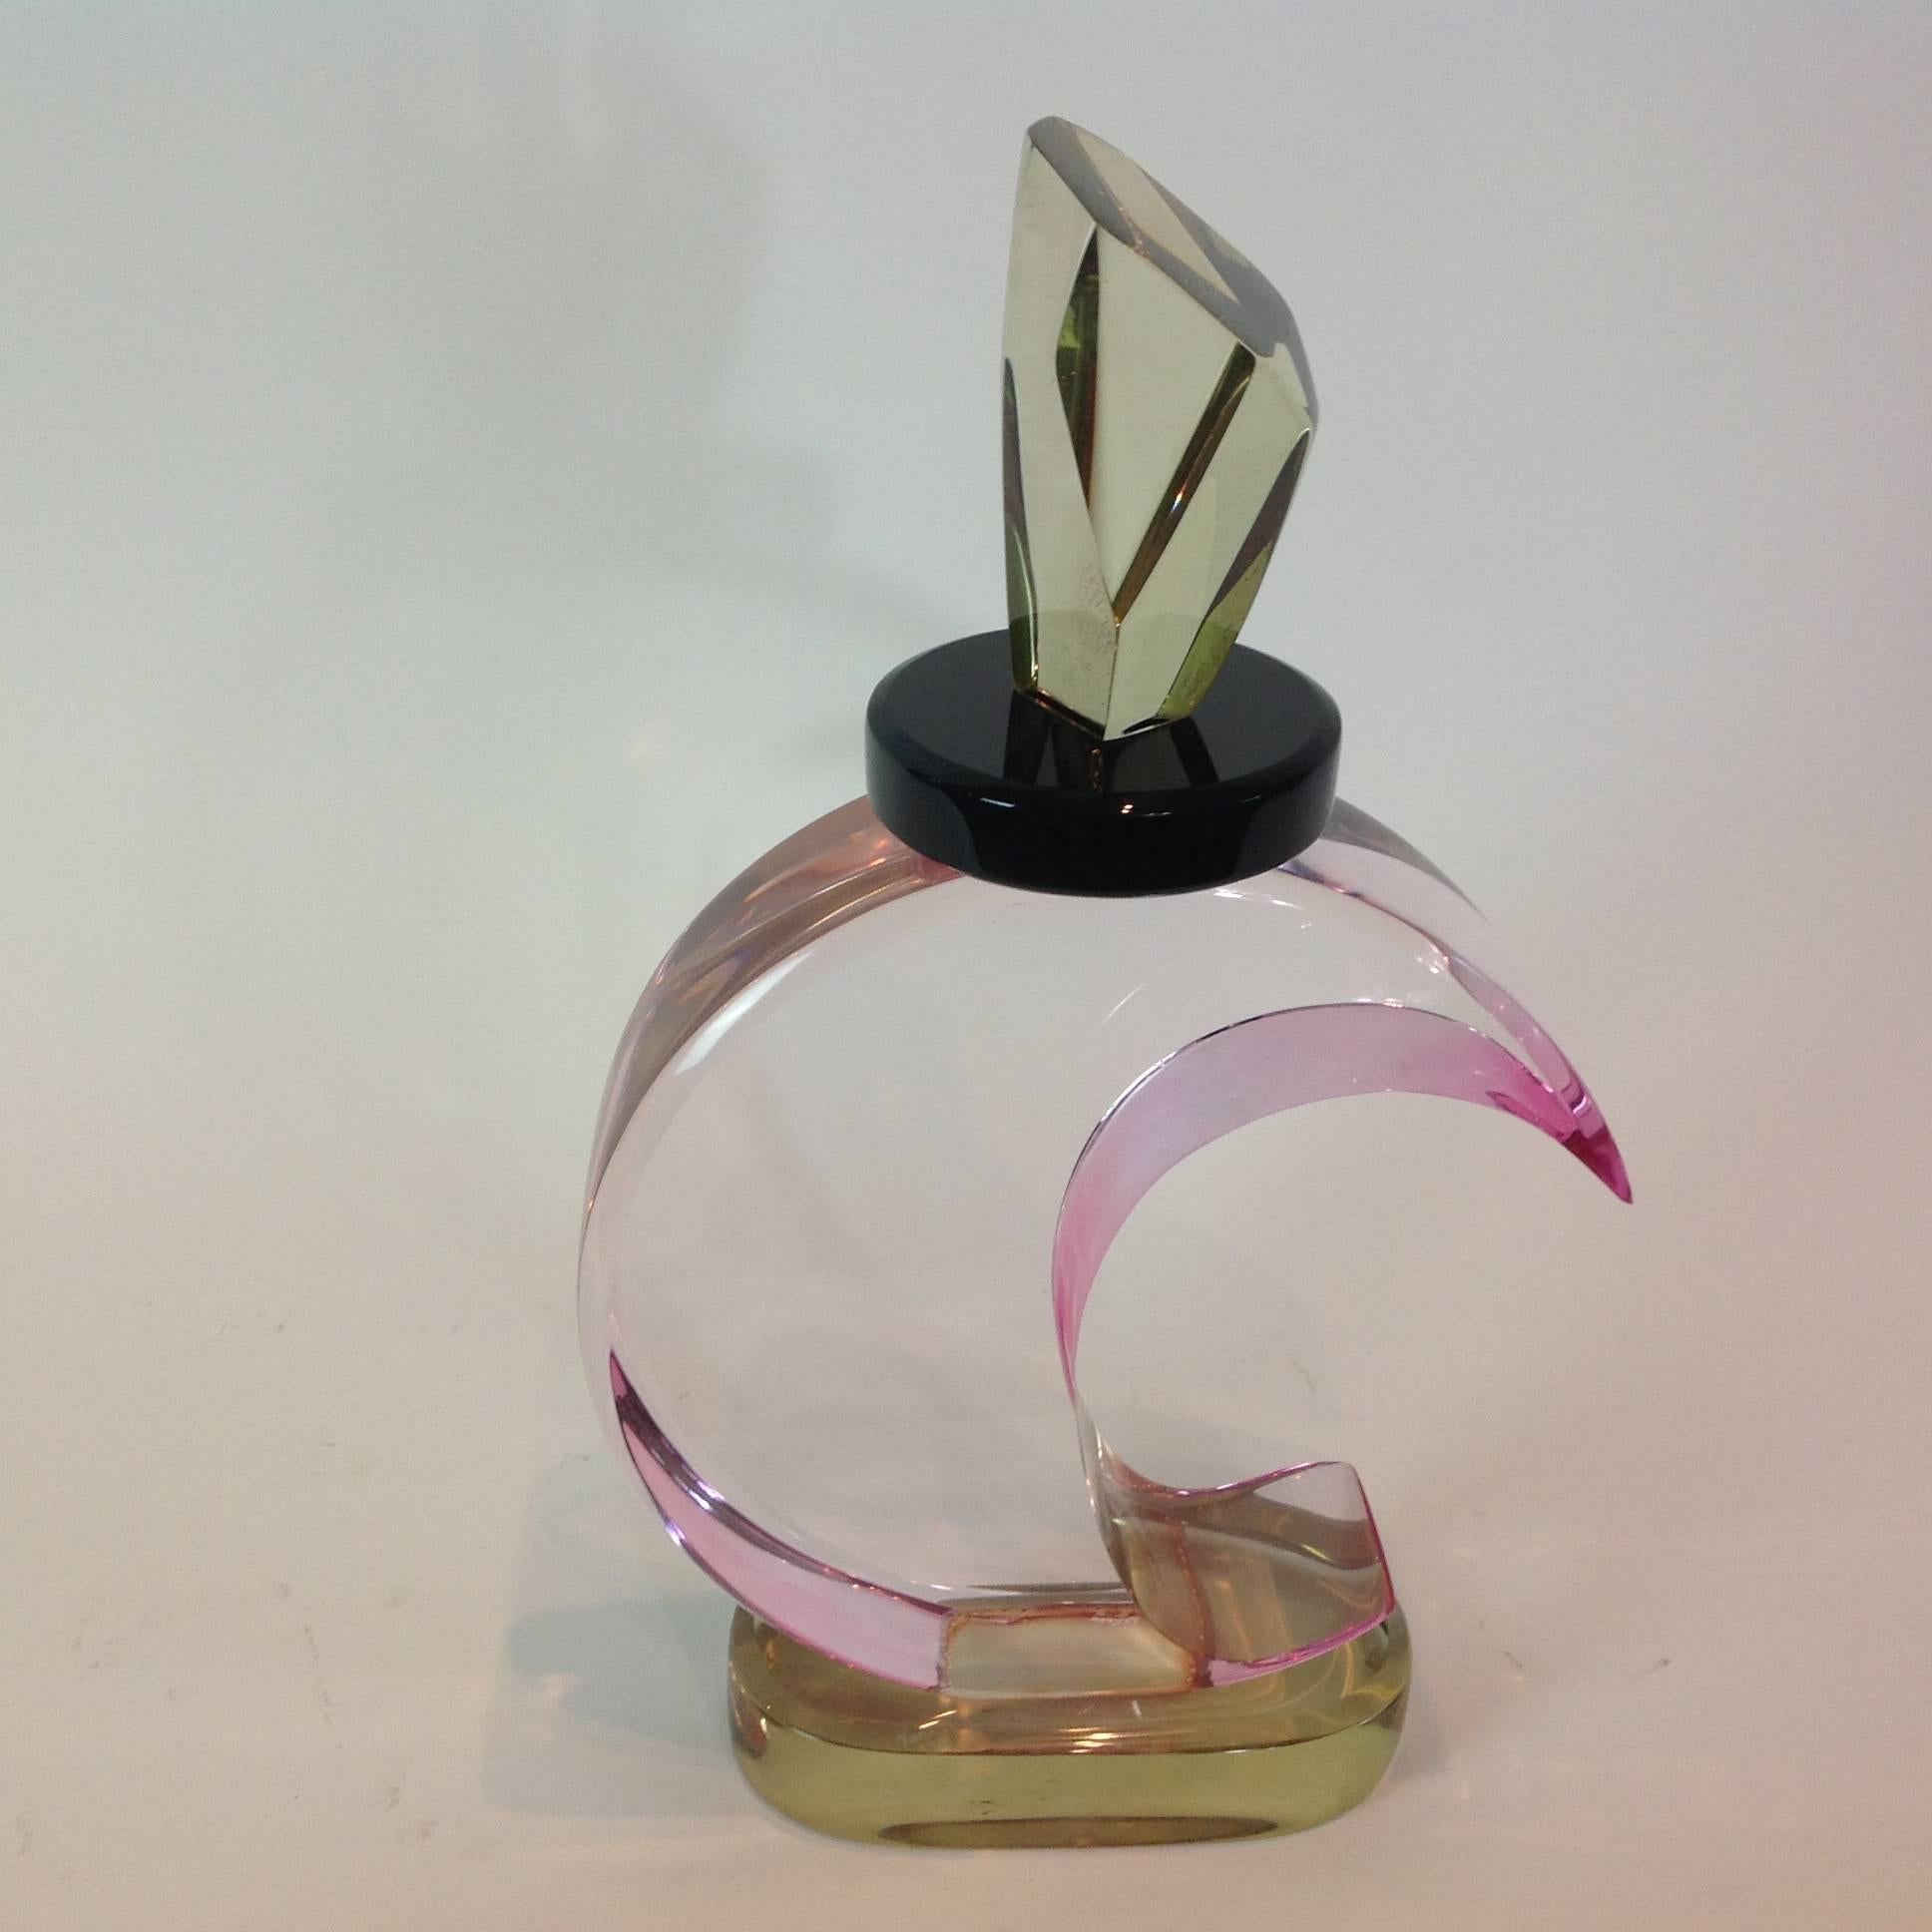 Fantastic sculpture of smooth Lucite parts formed in the shape of a perfume bottle. Soft pink and amber colors mixed with black and clear; signed.